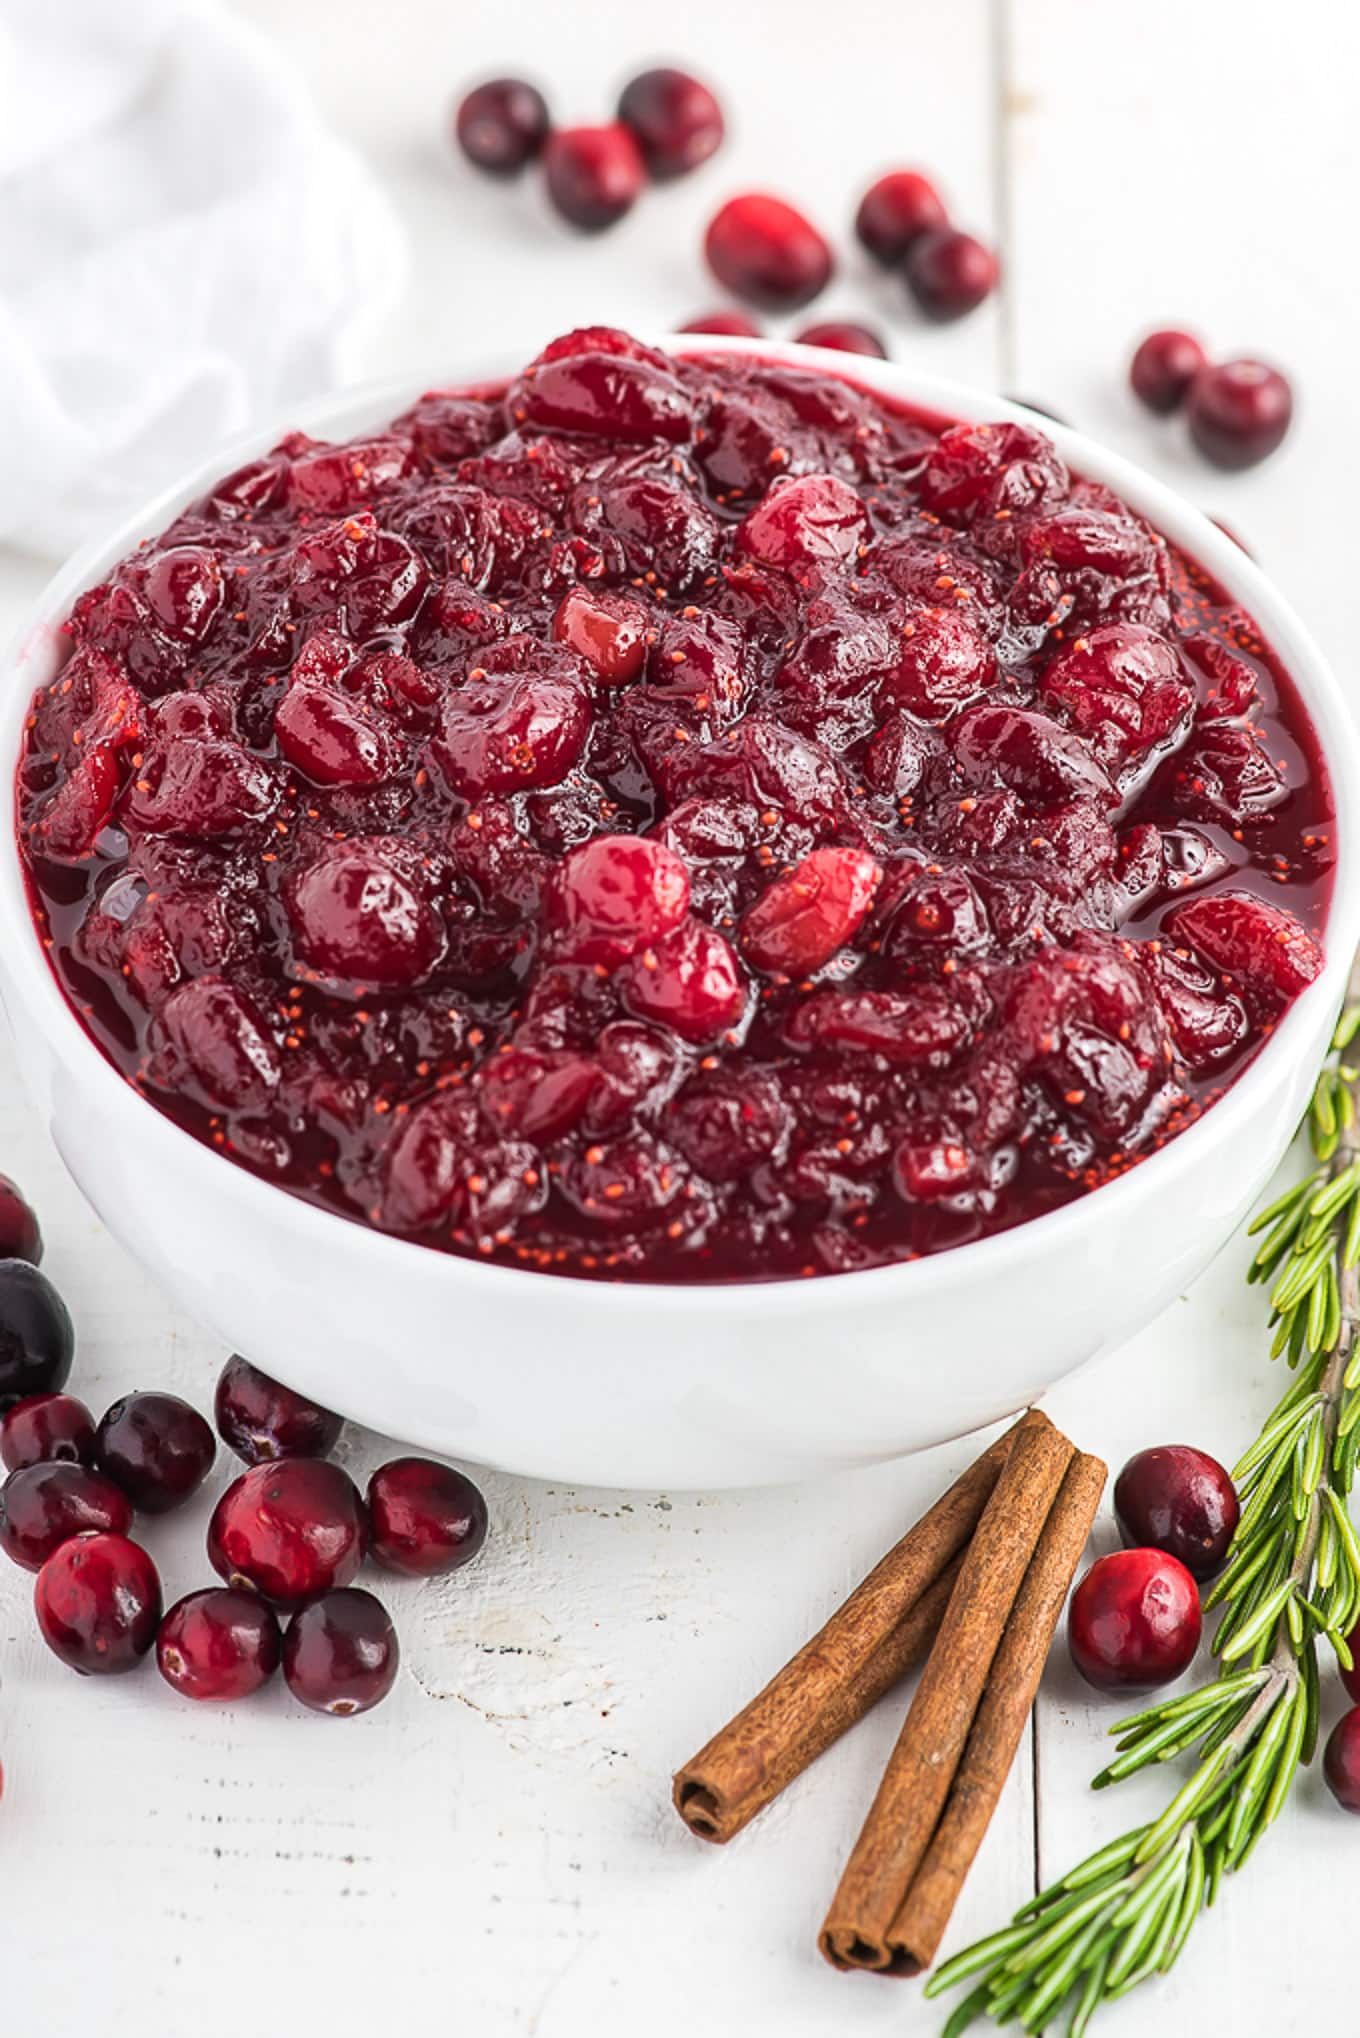 Orange juice cranberry sauce in a bowl on the table ready to serve.